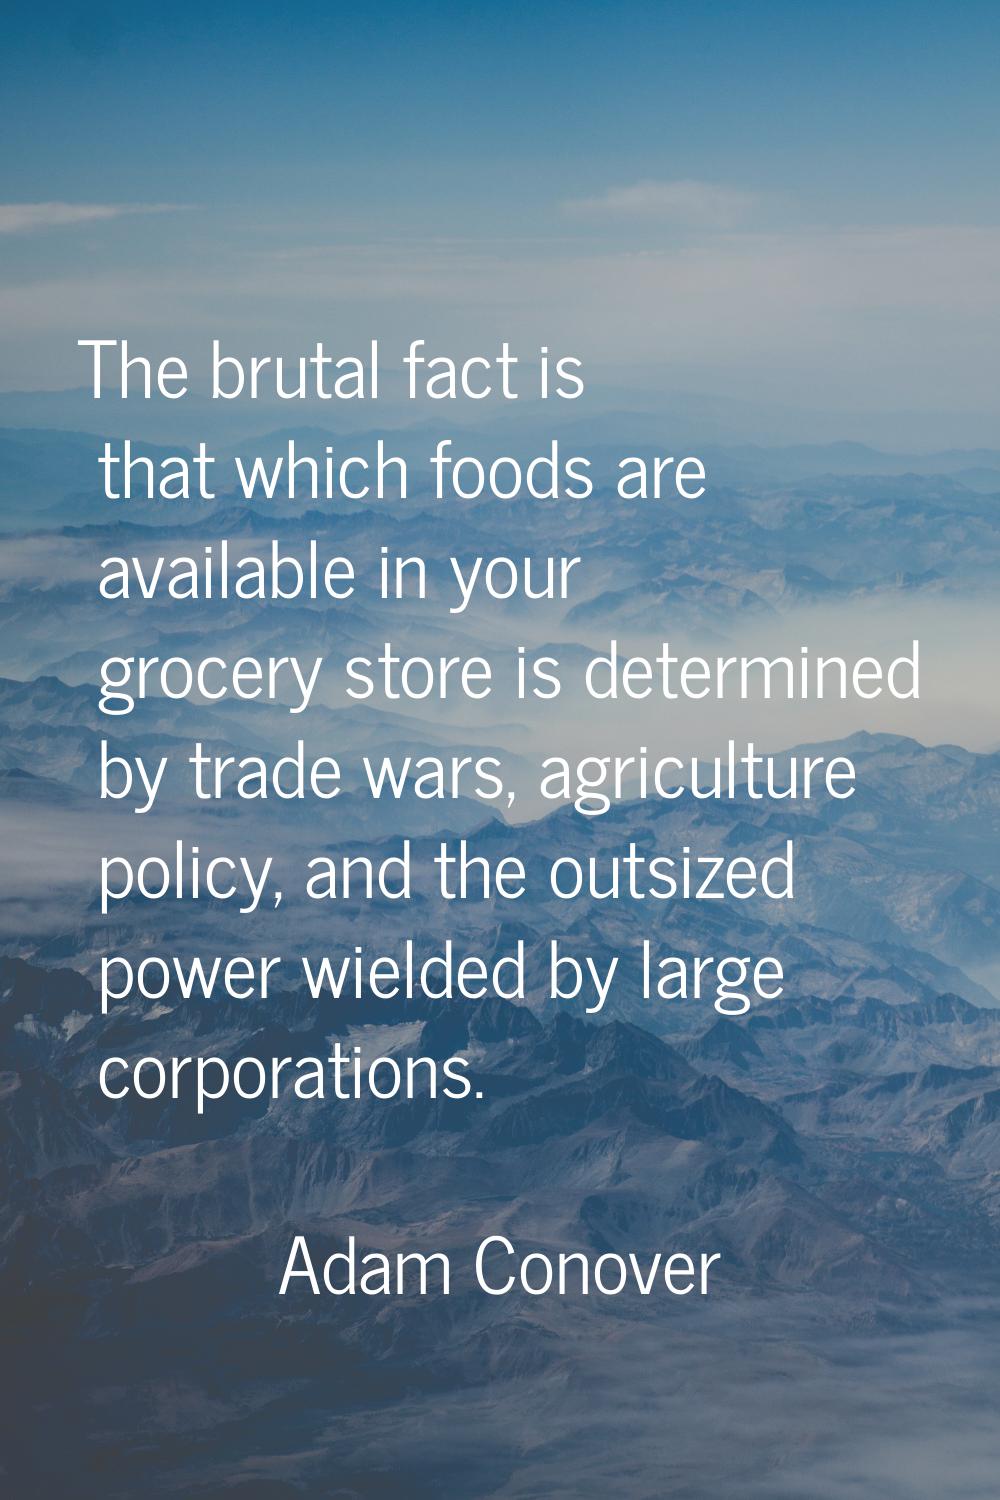 The brutal fact is that which foods are available in your grocery store is determined by trade wars